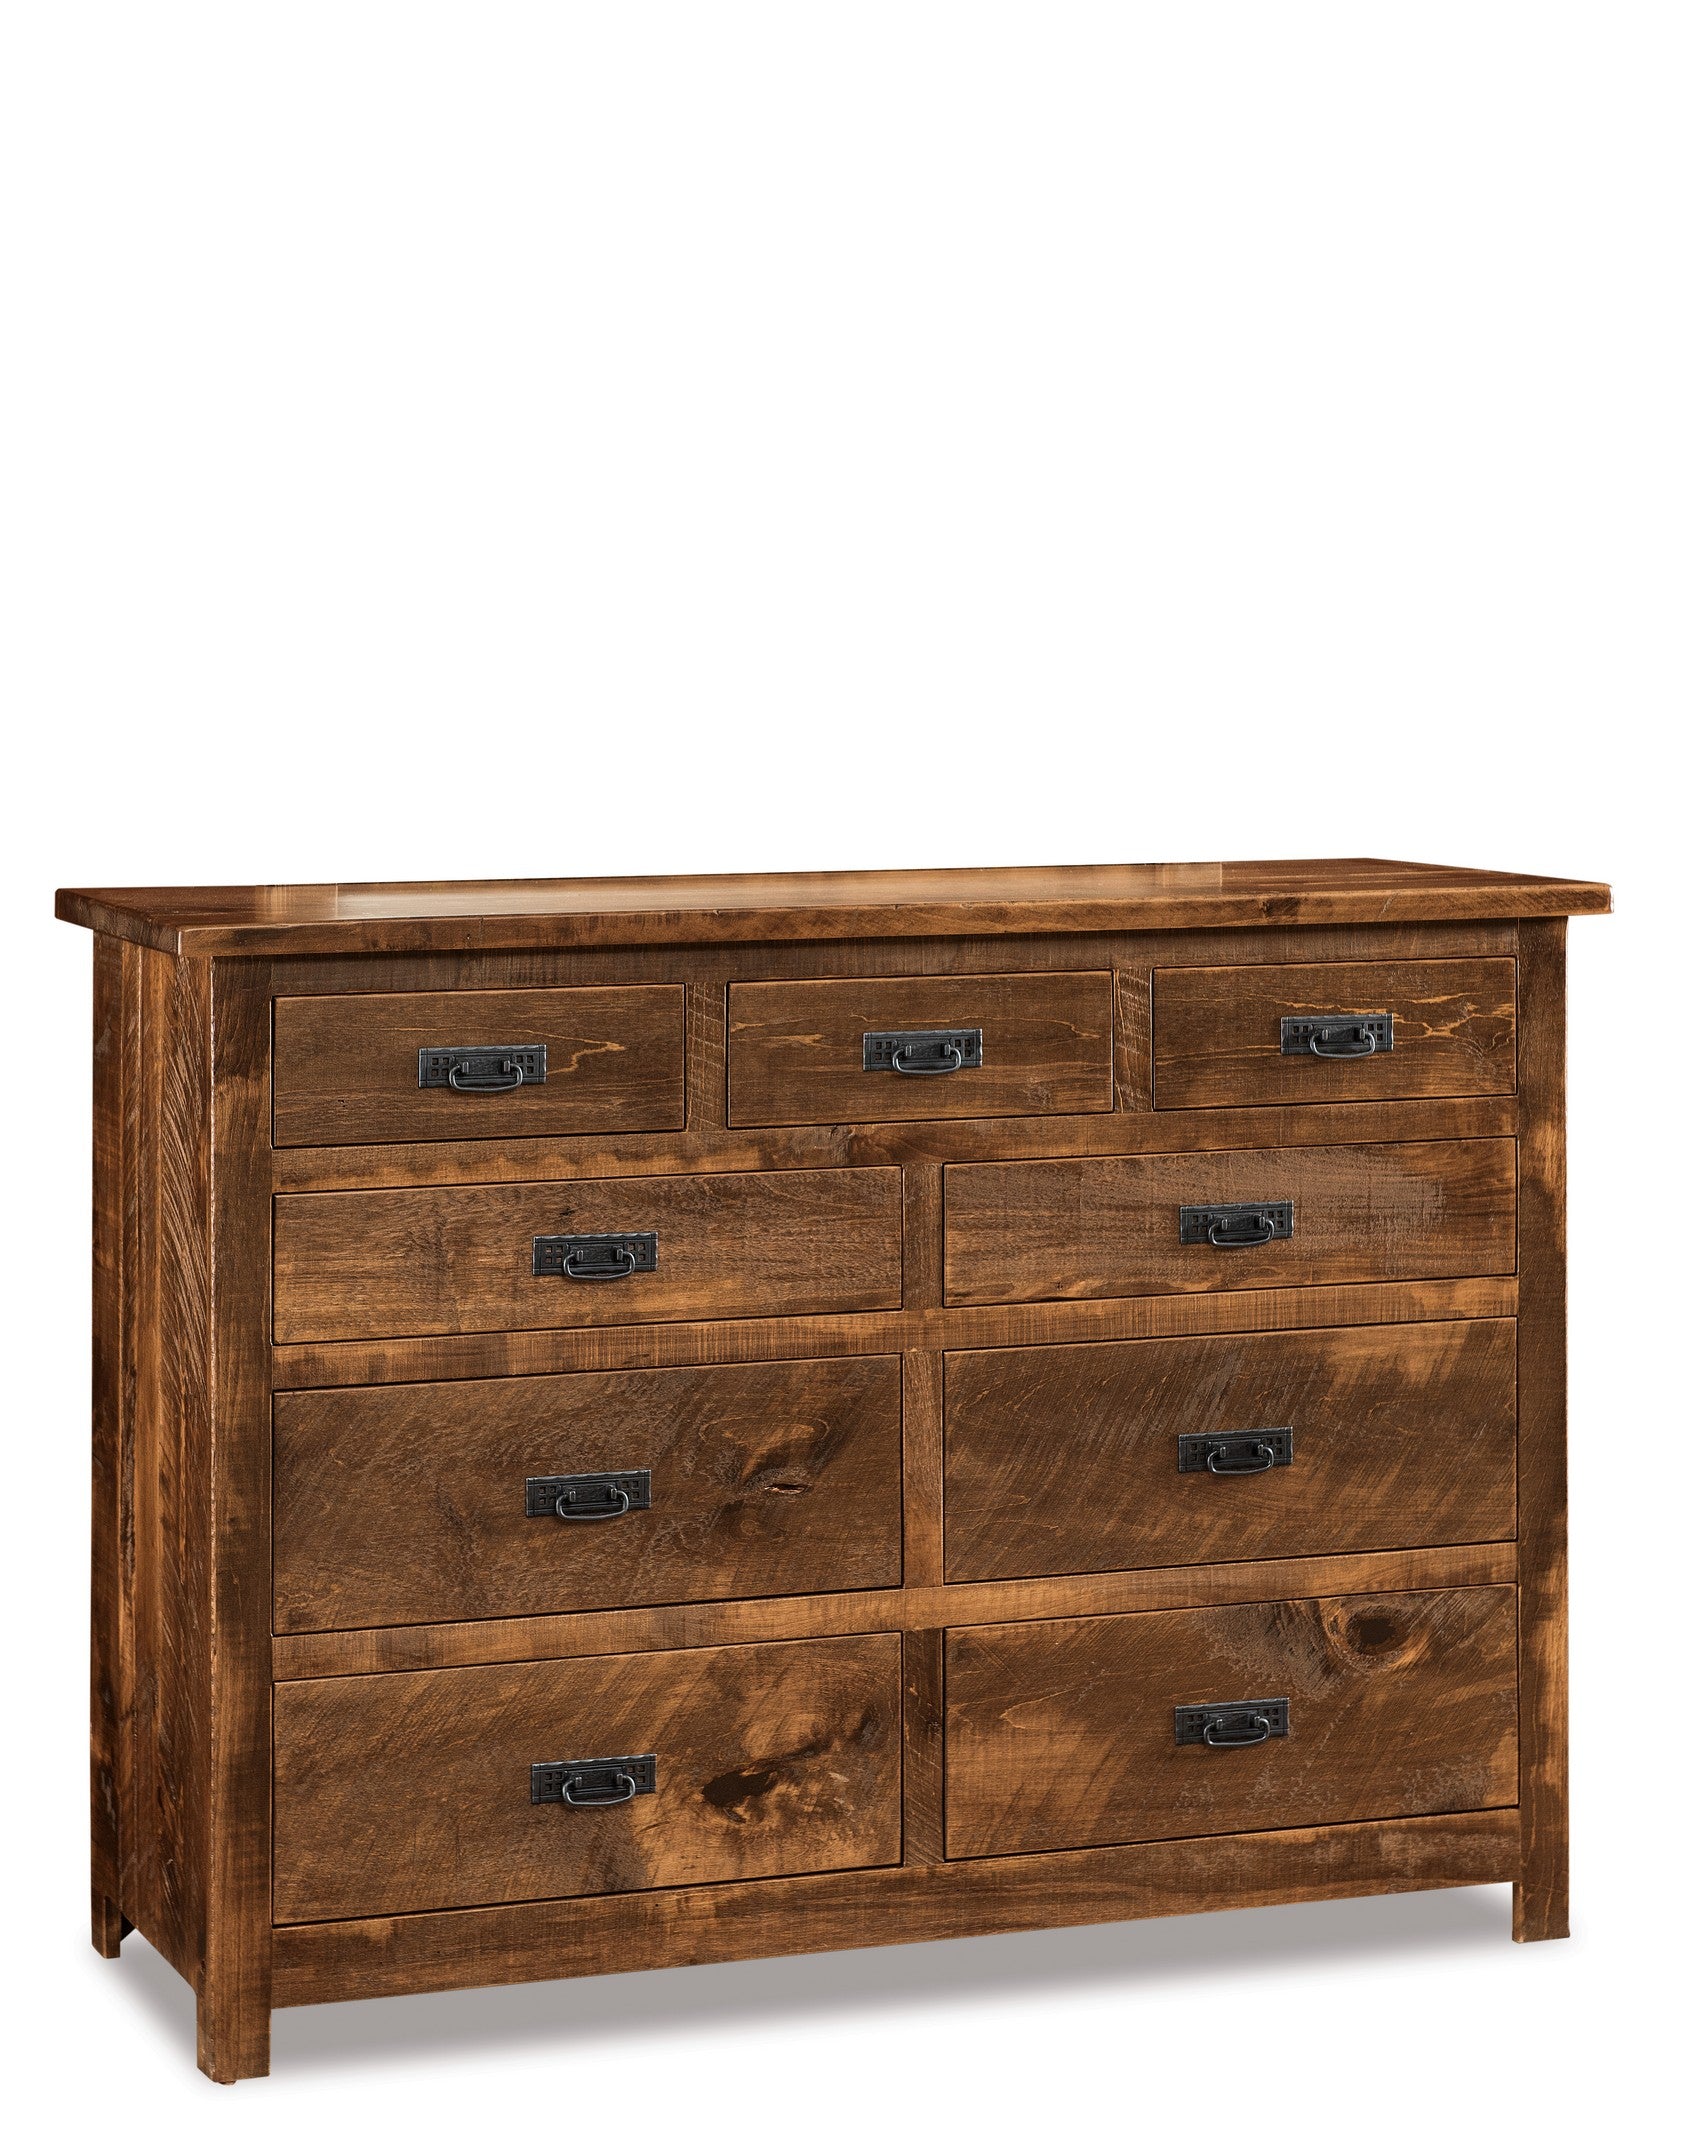 dumont nine drawer dresser in rough sawn brown maple with almond stain